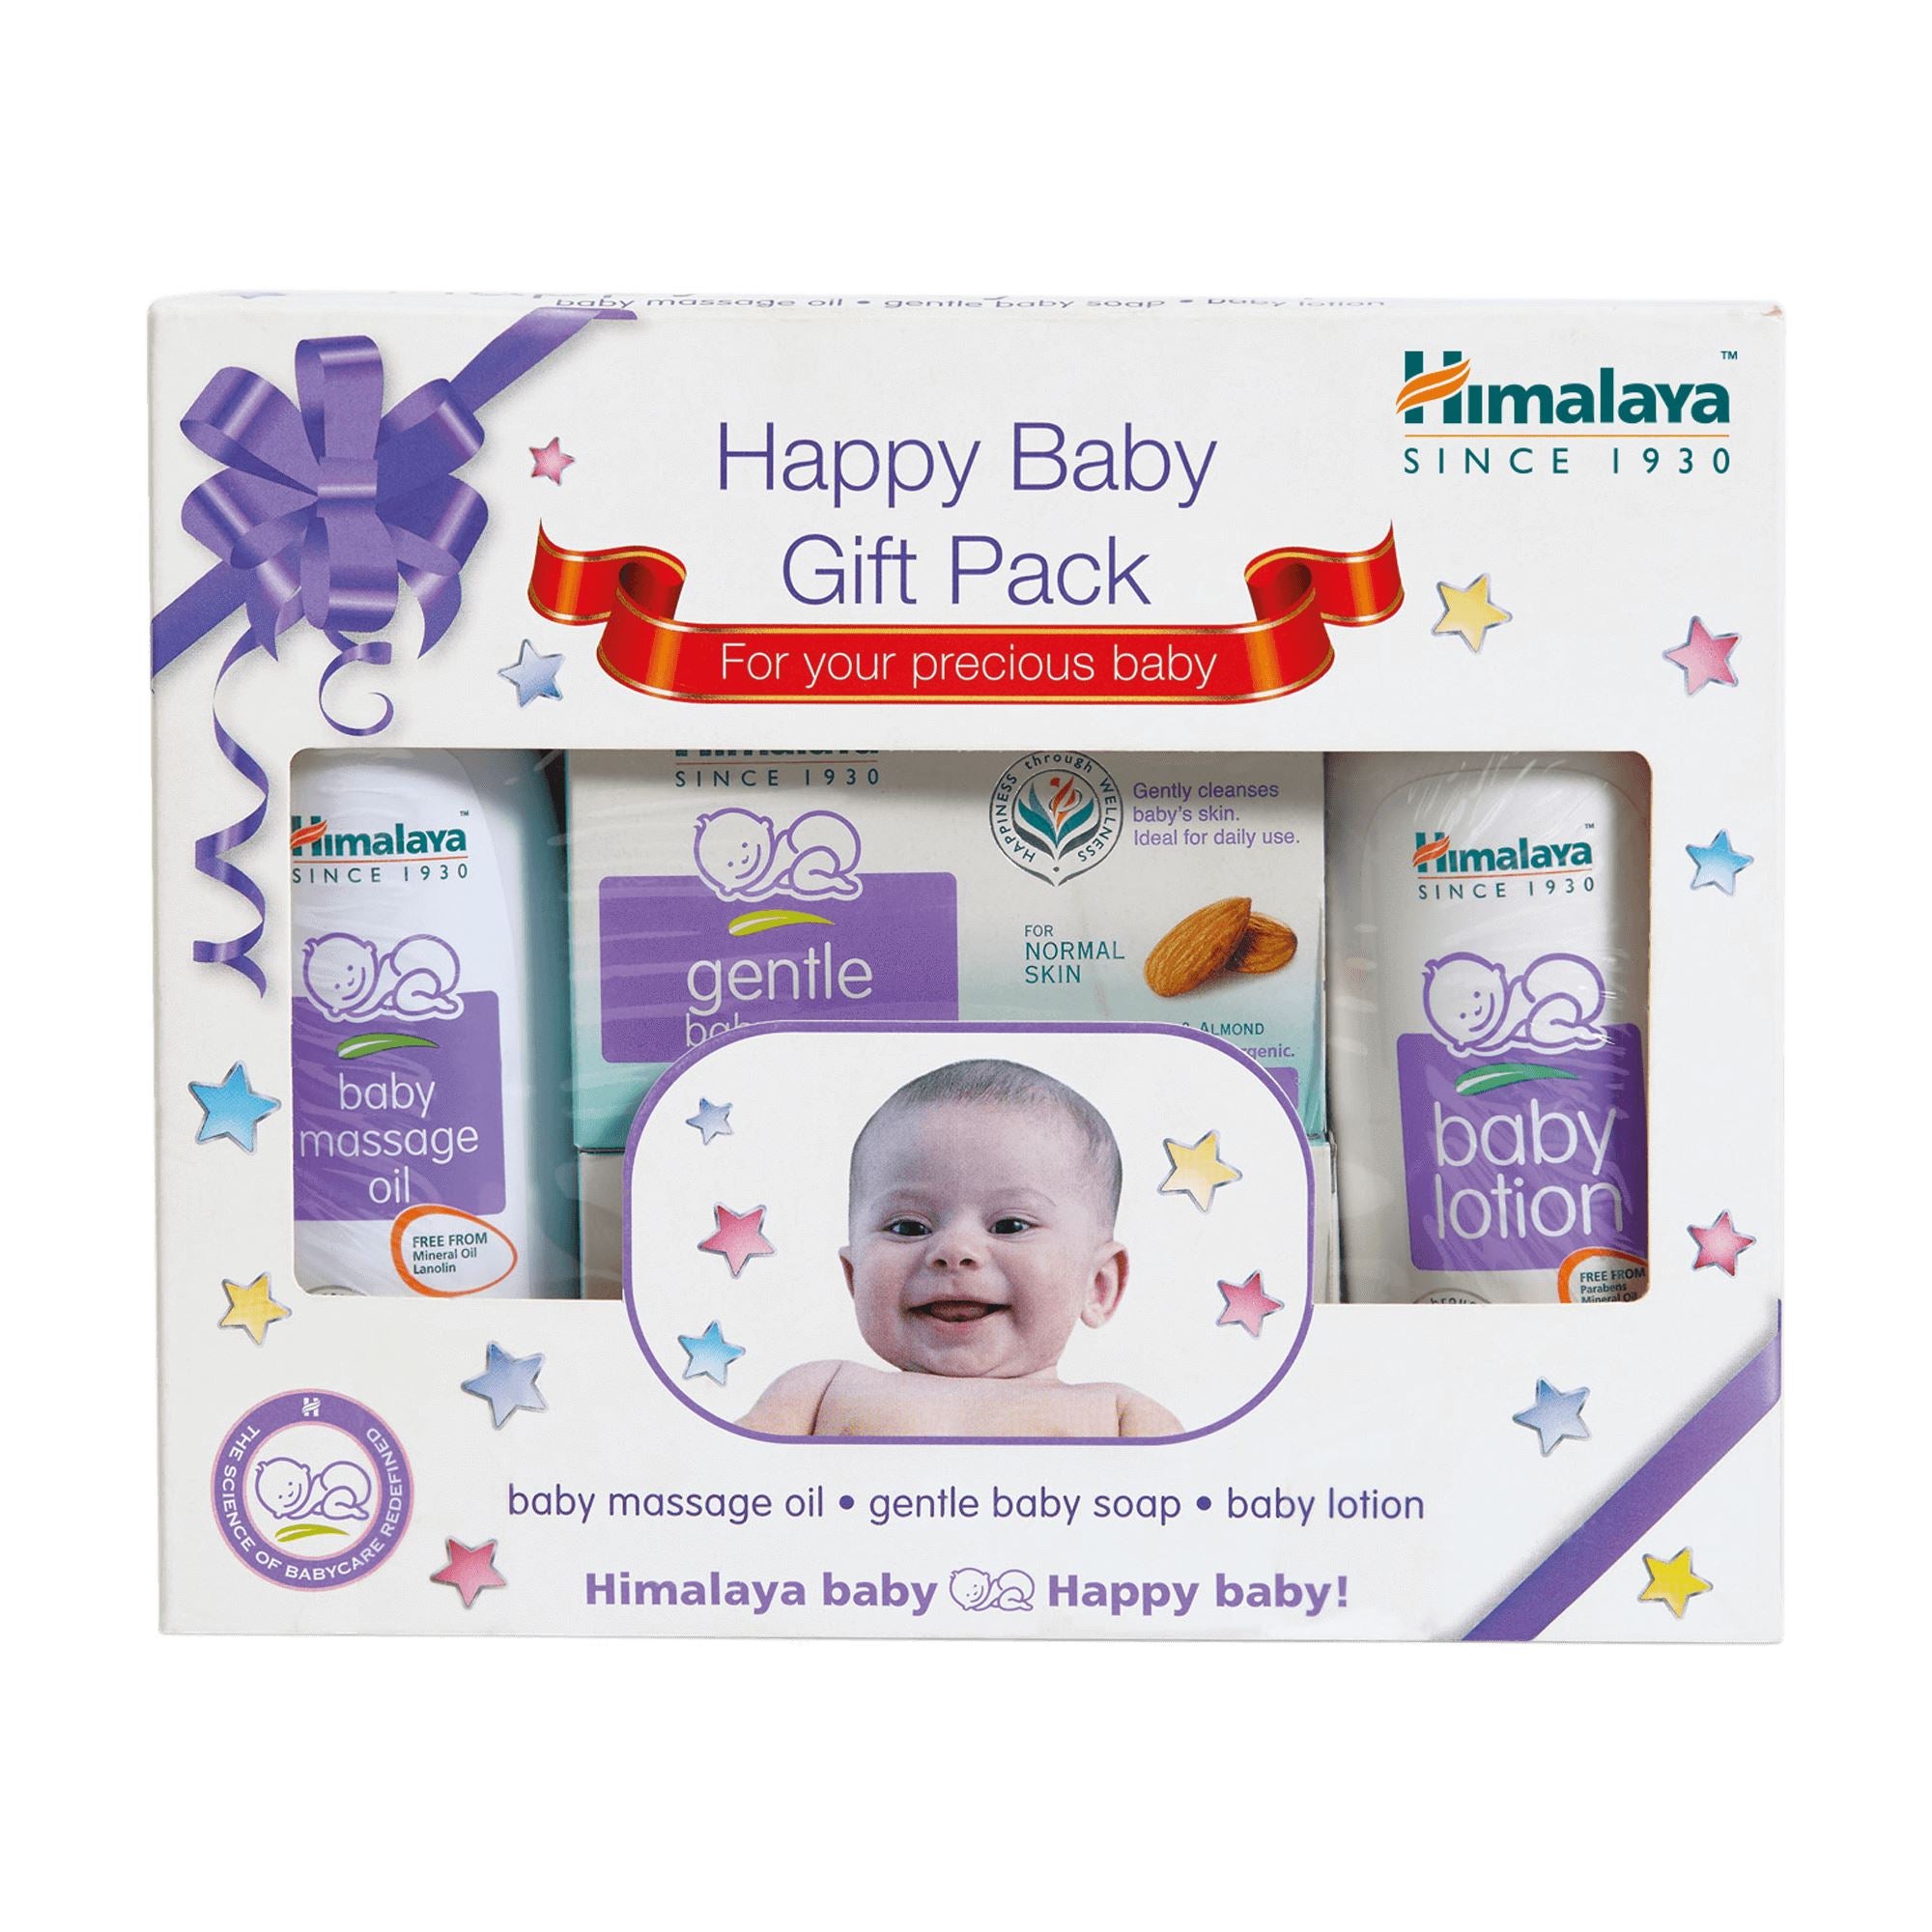 Himalaya Babycare Gift Pack (Oil-Soap-Lotion) - Himalaya baby oil, soap, and lotion